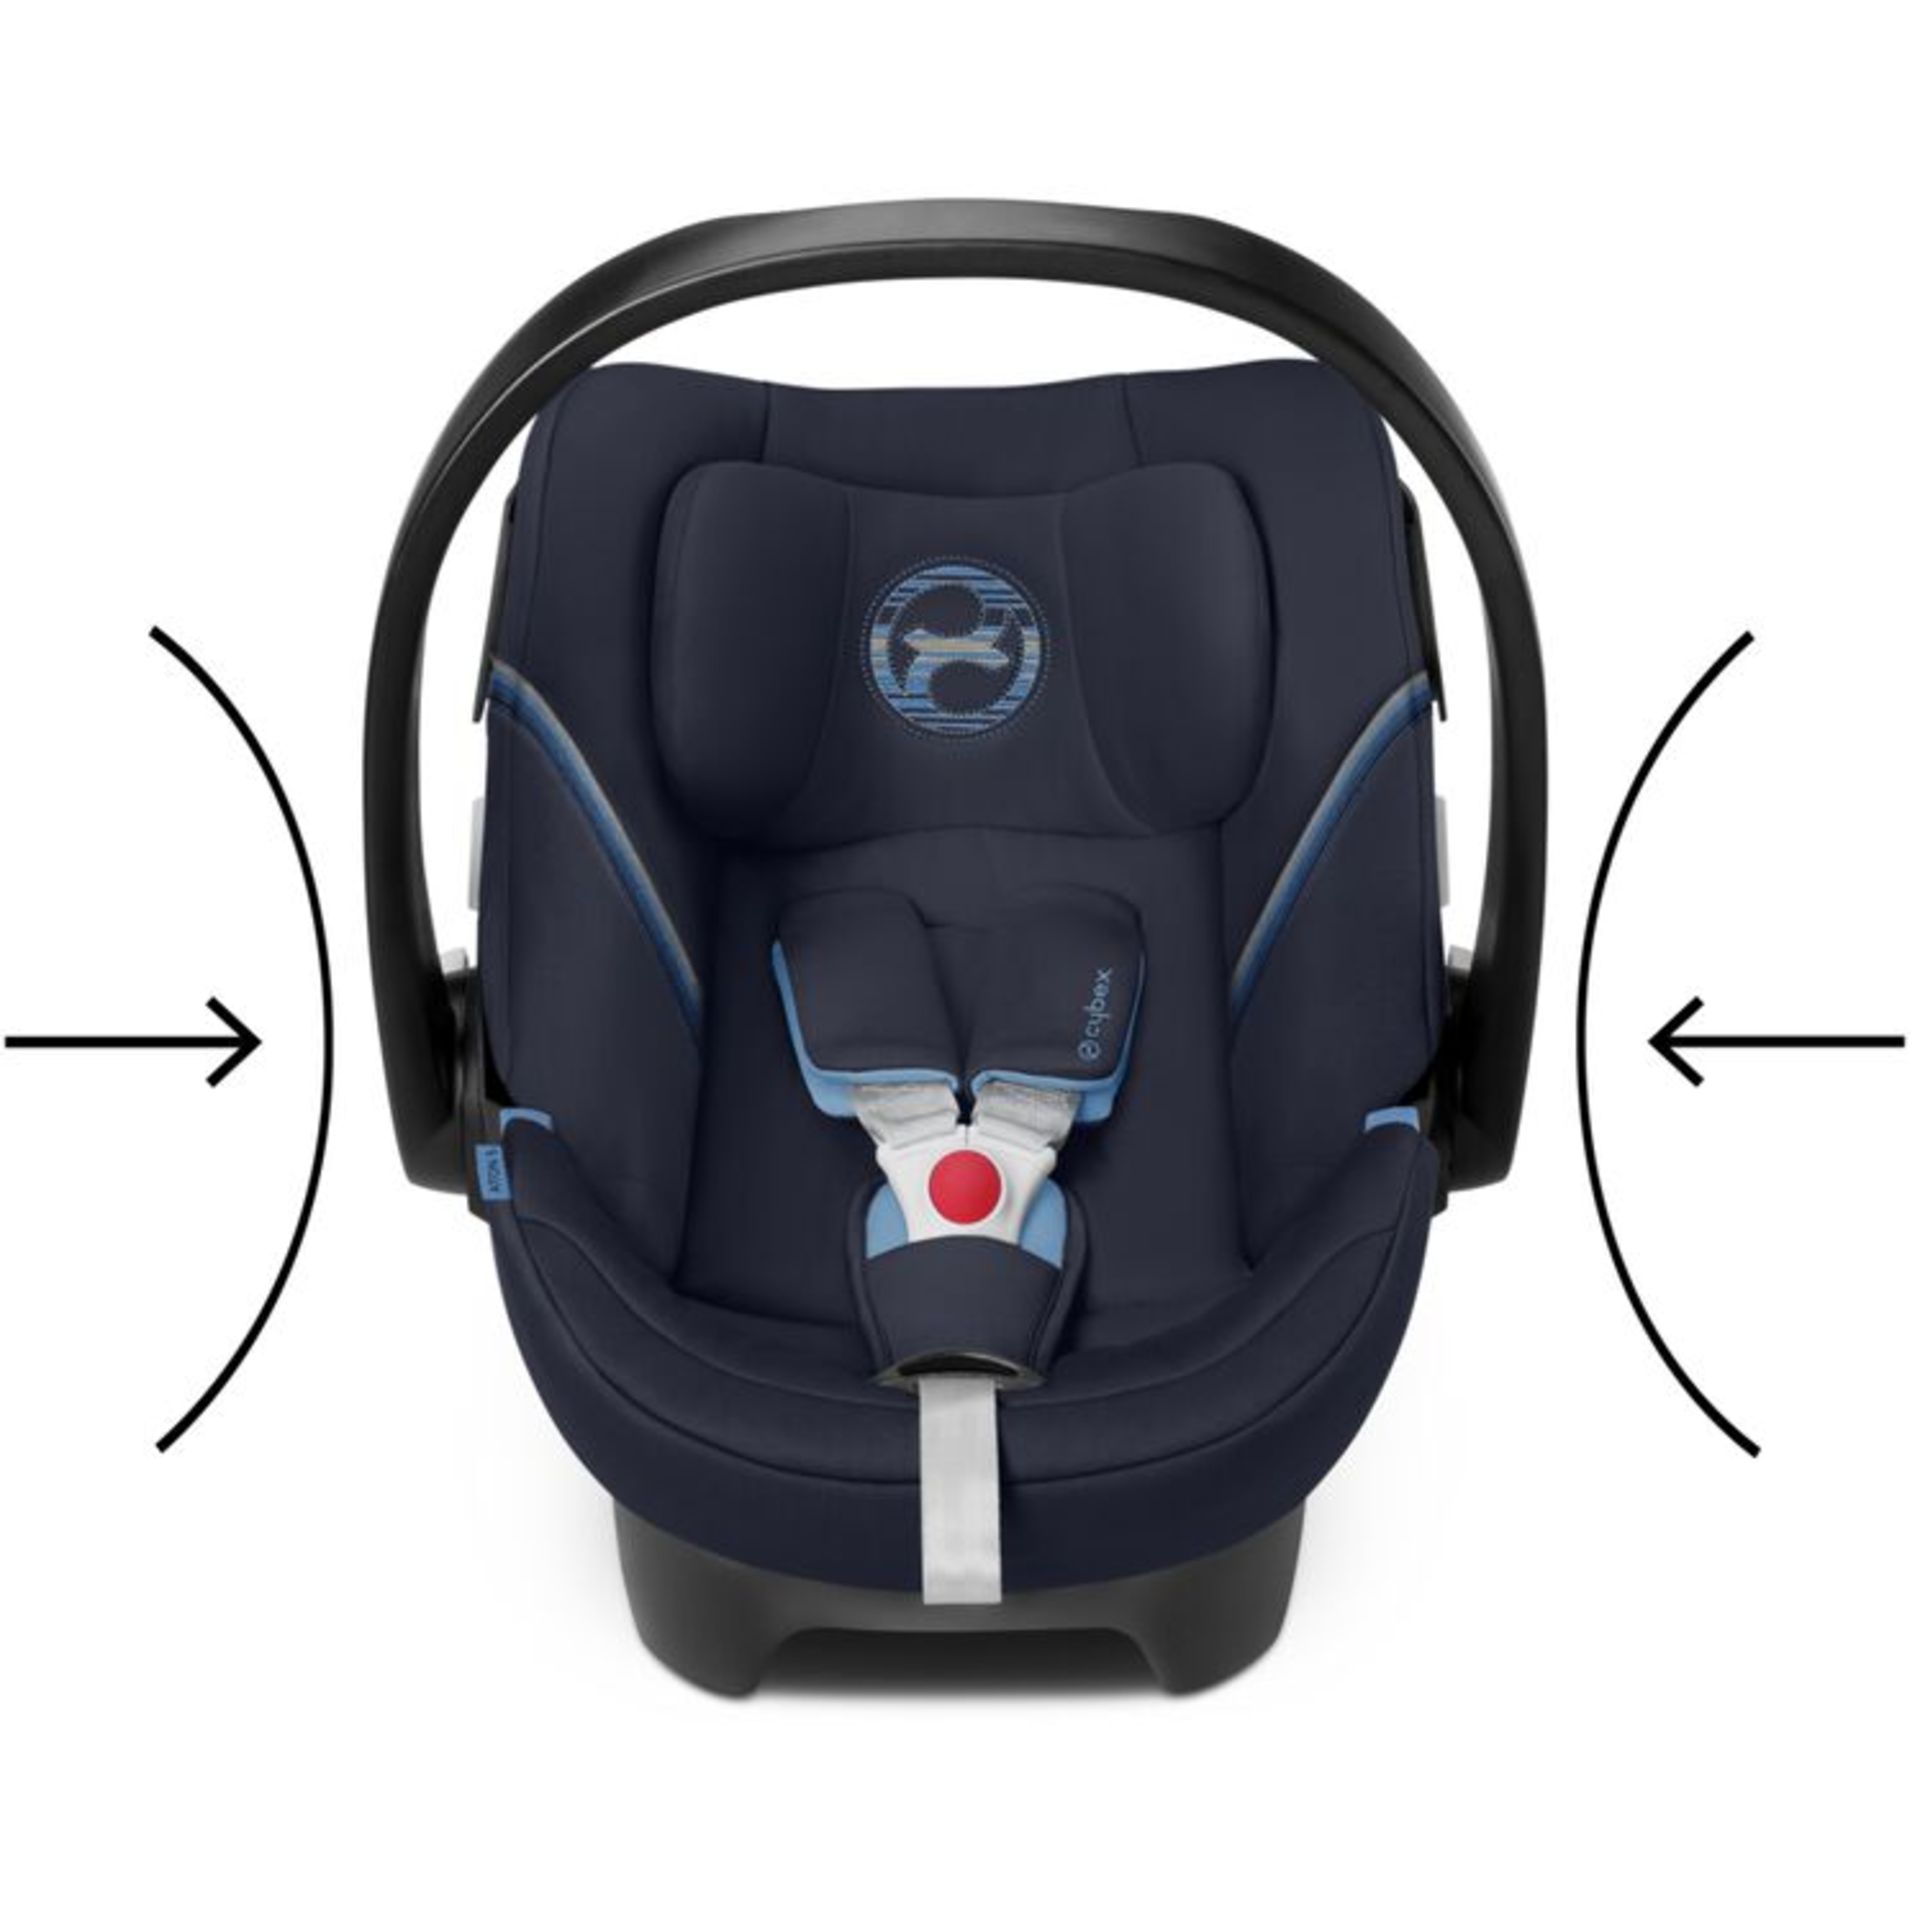 CYBEX ATON 5 INFANT CAR SEAT IN BLACK - RRP £149 - Image 6 of 6